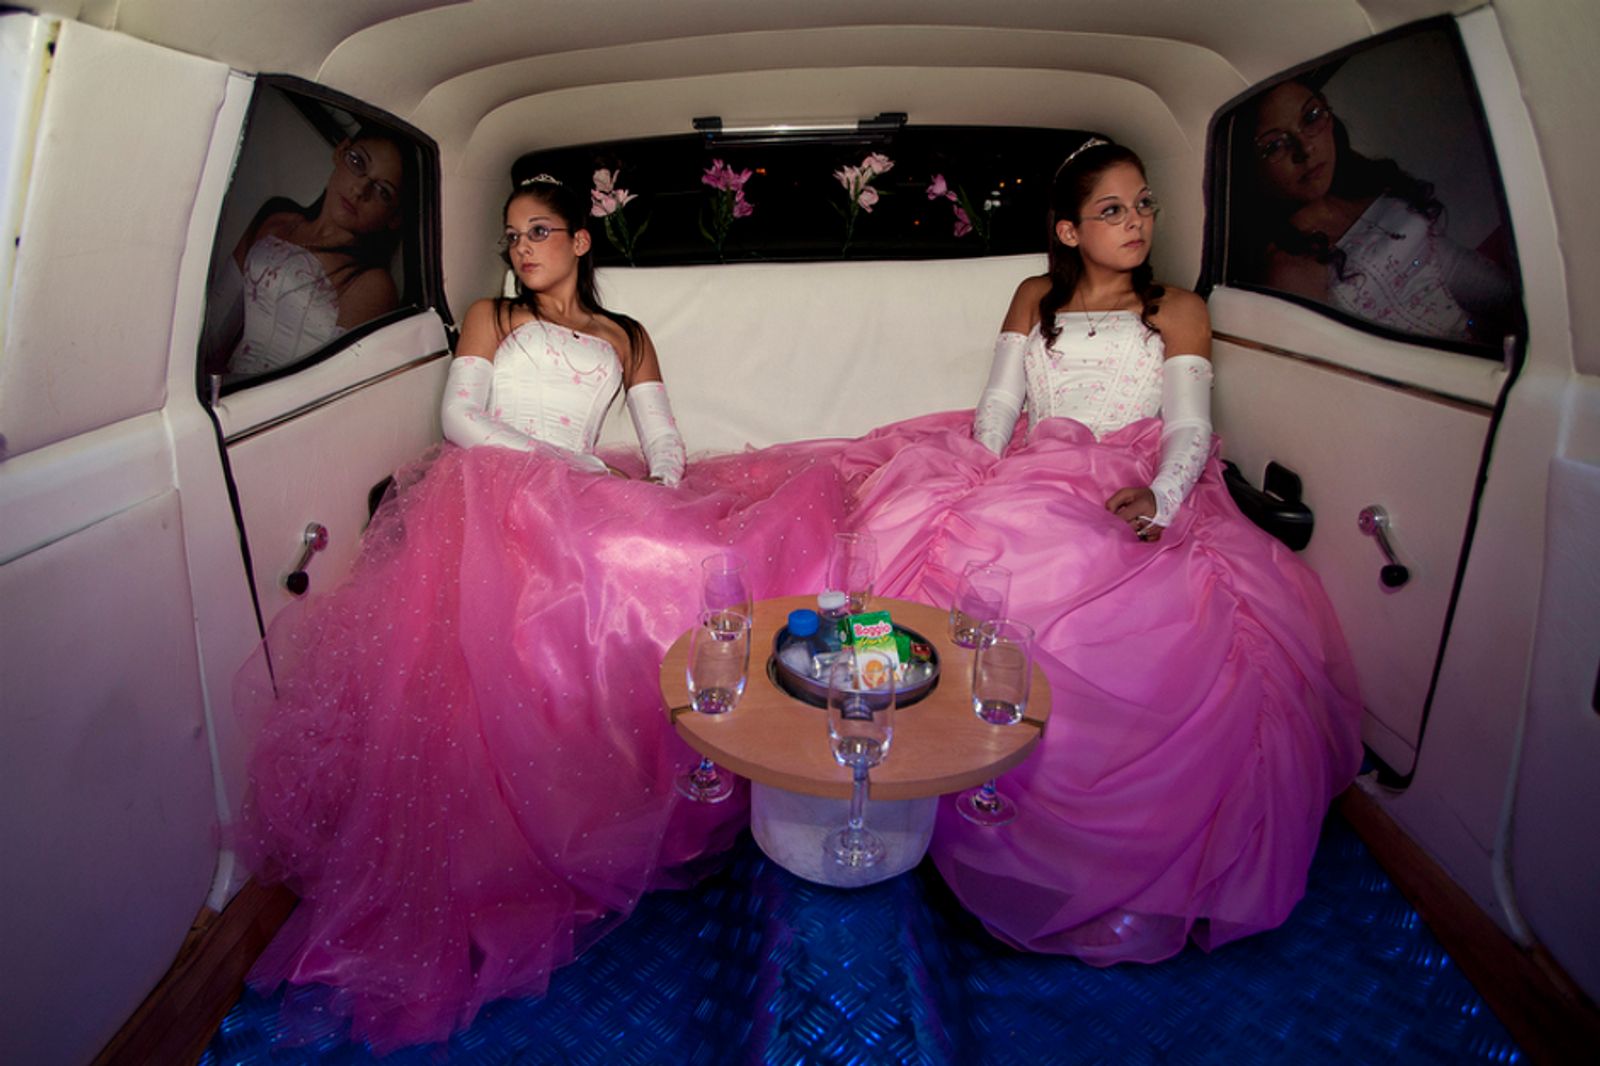 © Myriam Meloni - Image from the Limousine porteña photography project